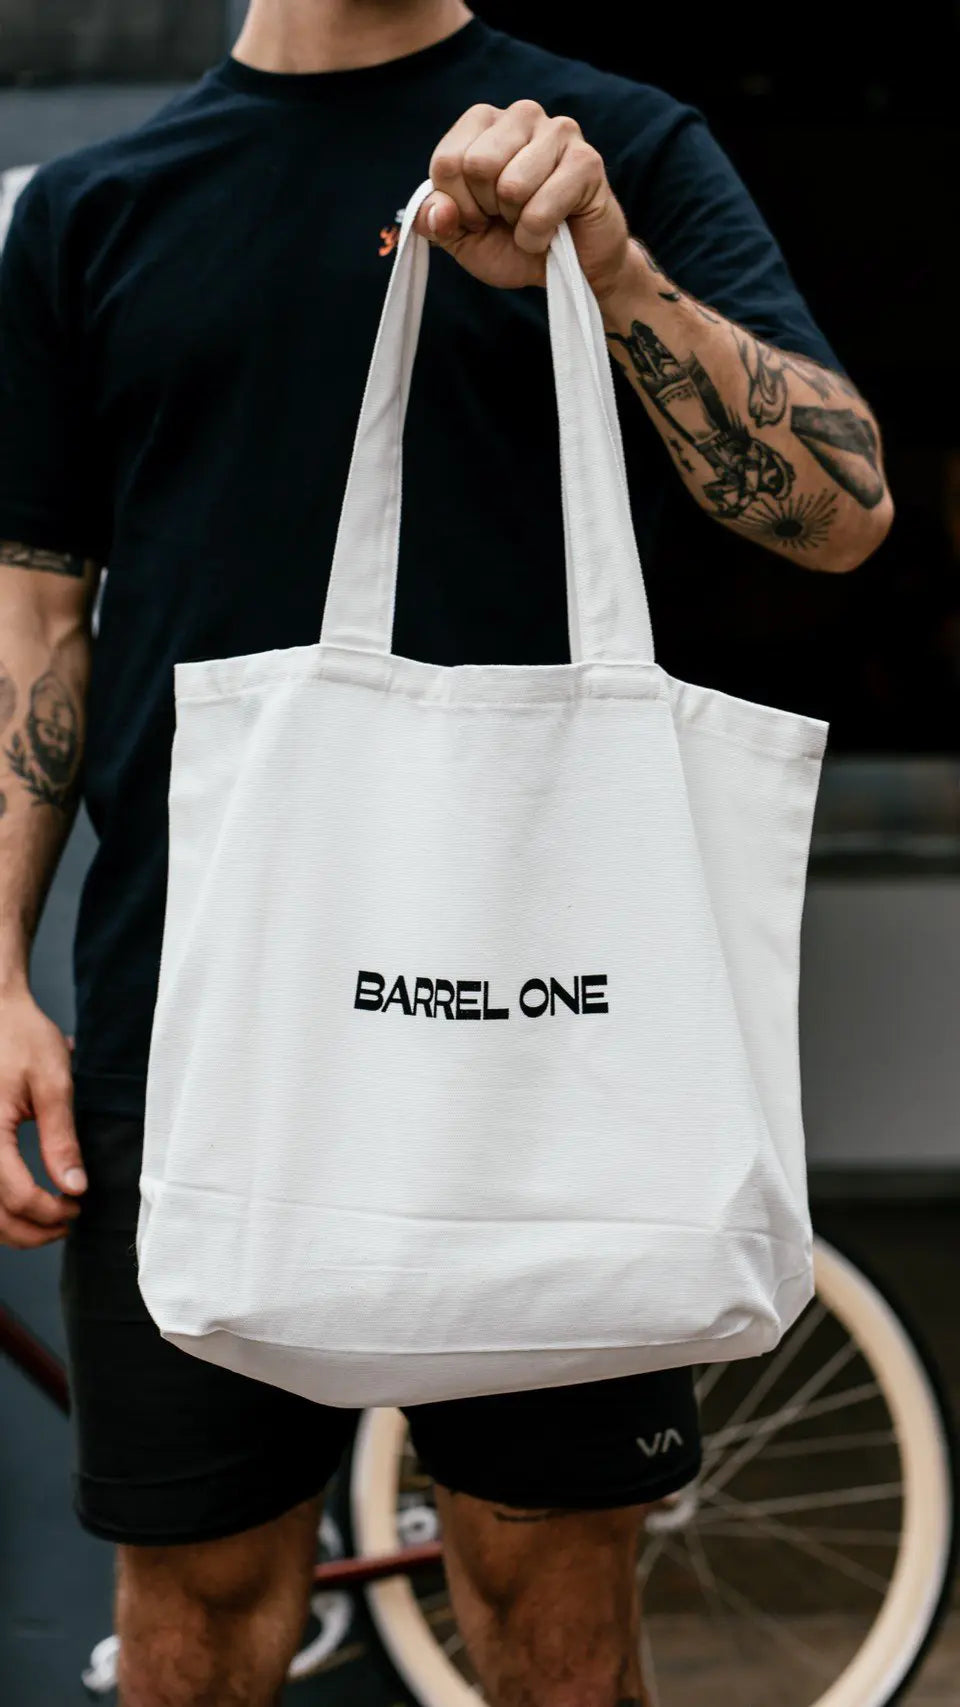 White tote bag with a stylish summer design and the barrel one logo being carried by a person. Stay fashionable and functional this season with our trendy beach tote - perfect for carrying your essentials on a sunny day. 